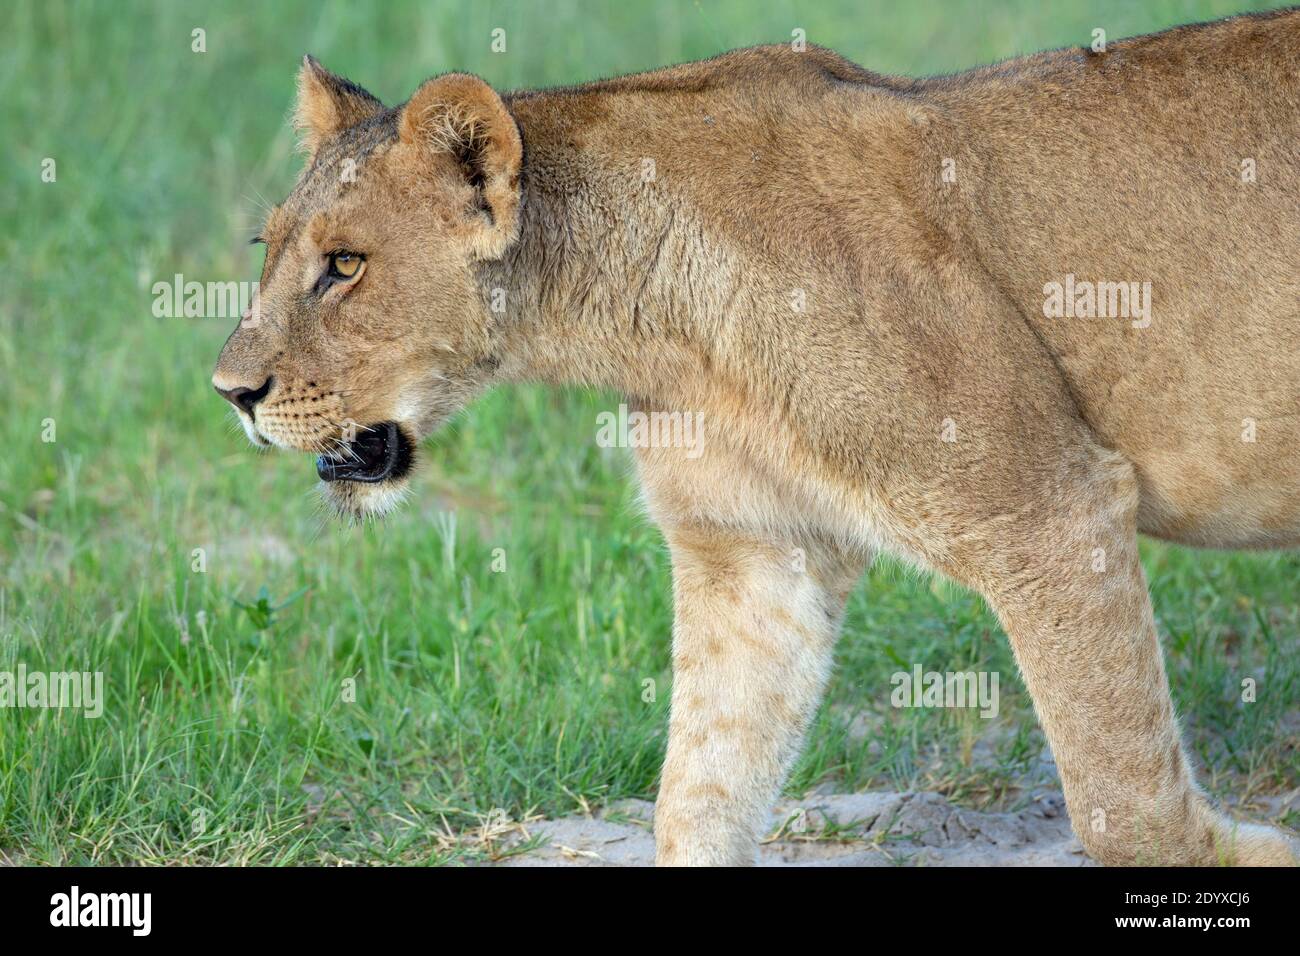 African Lion (Panthera leo). Appearance of a healthy, younger adult female, lioness. Bright eyed, alert, attentive, coat, fur, pelage in good cared fo Stock Photo